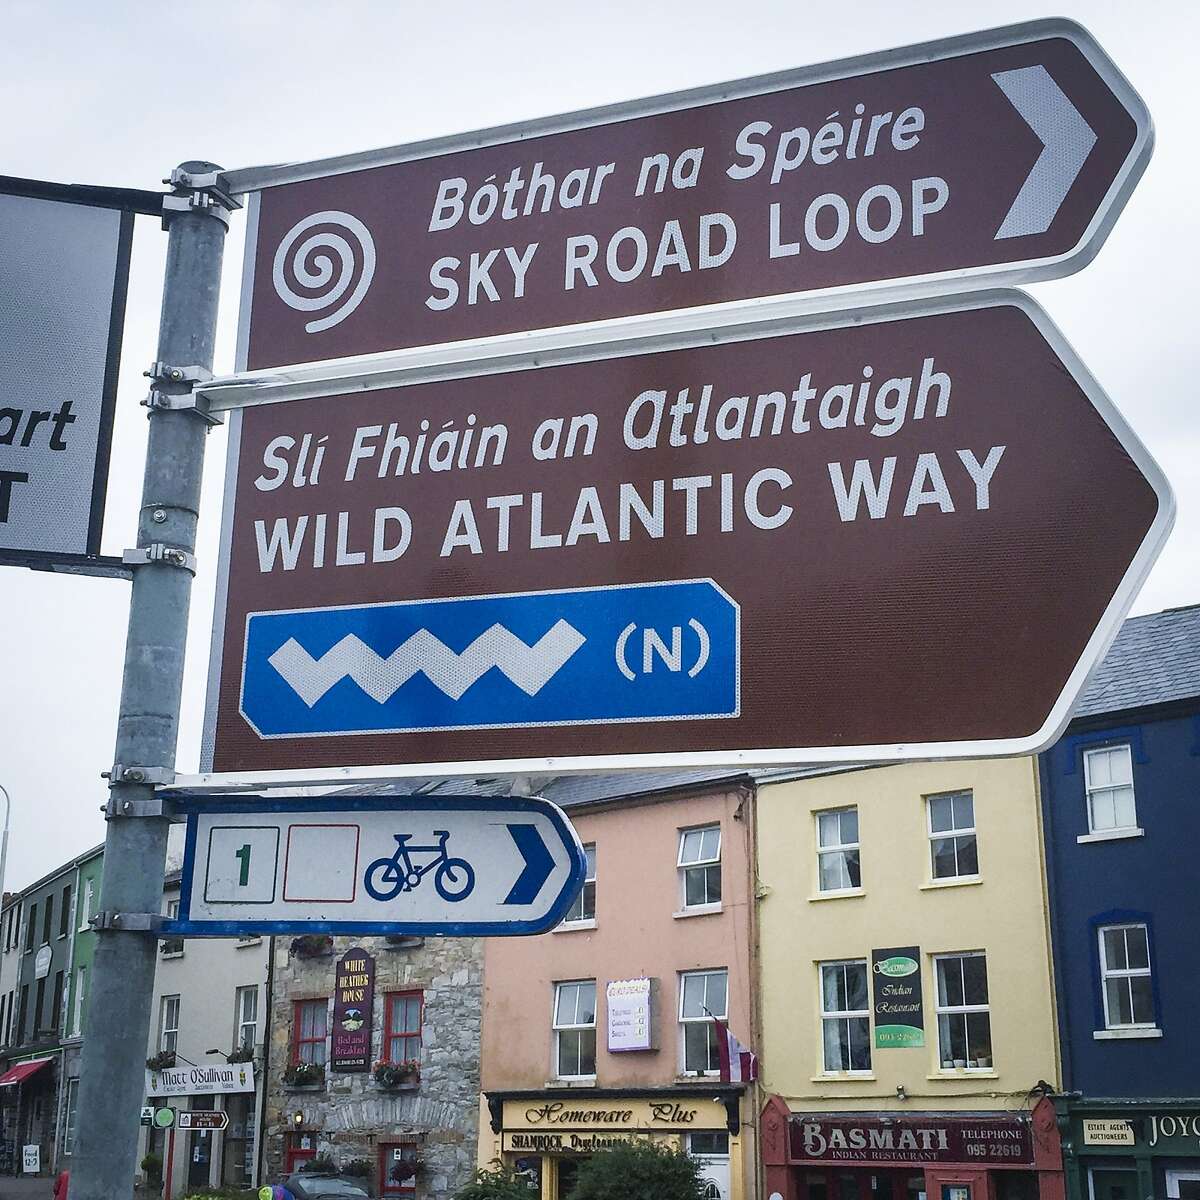 Signs mark Ireland's Wild Atlantic Way from north to south.